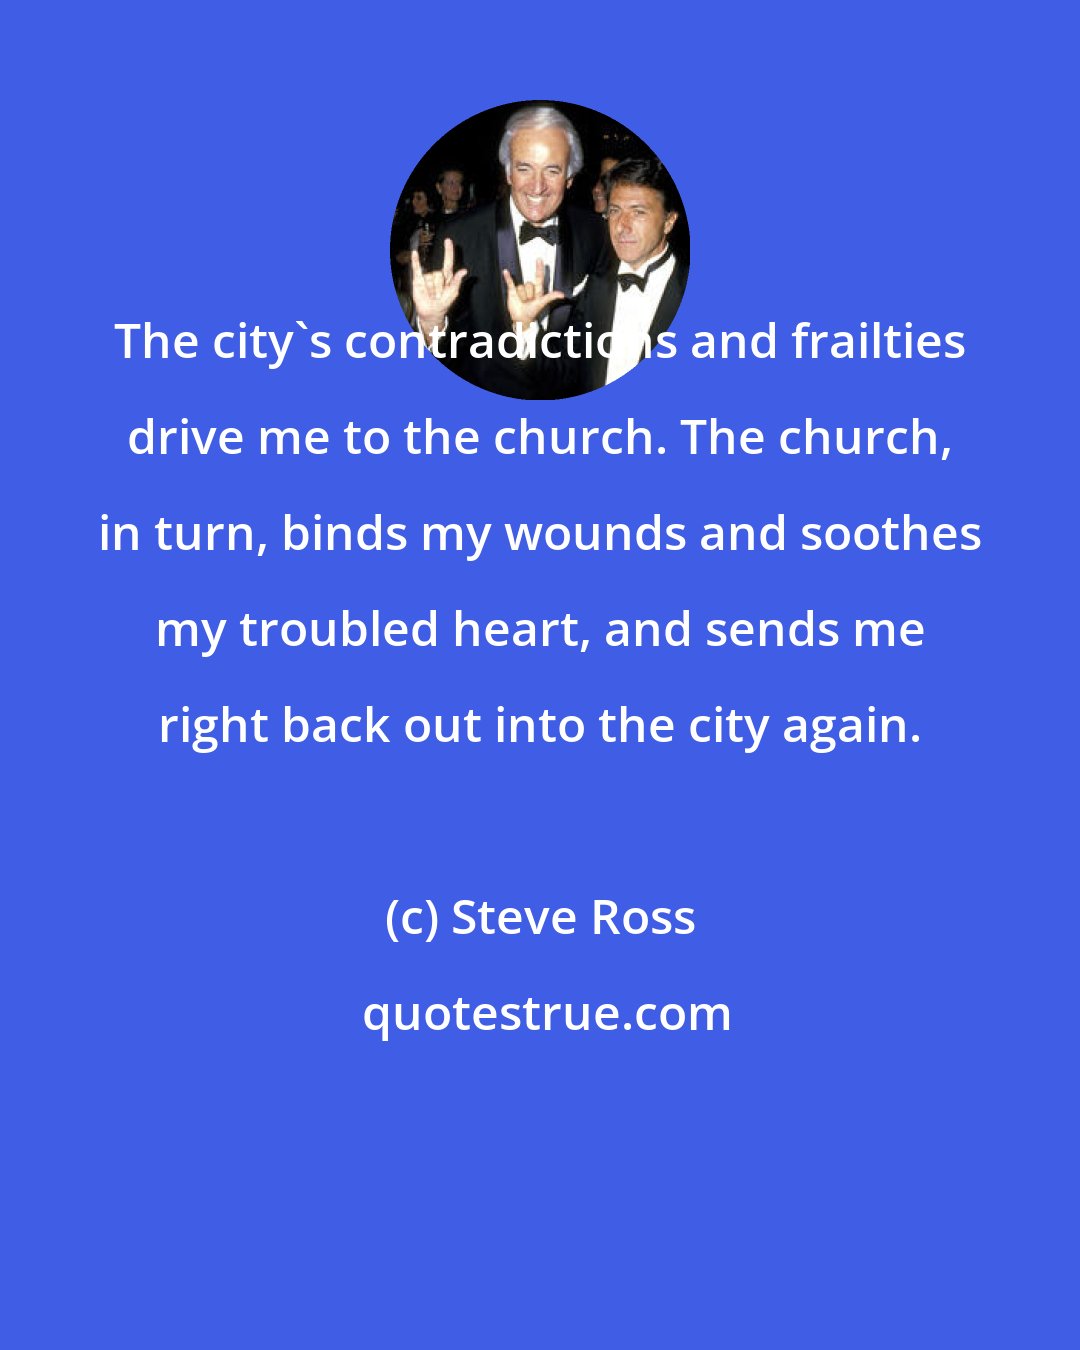 Steve Ross: The city's contradictions and frailties drive me to the church. The church, in turn, binds my wounds and soothes my troubled heart, and sends me right back out into the city again.